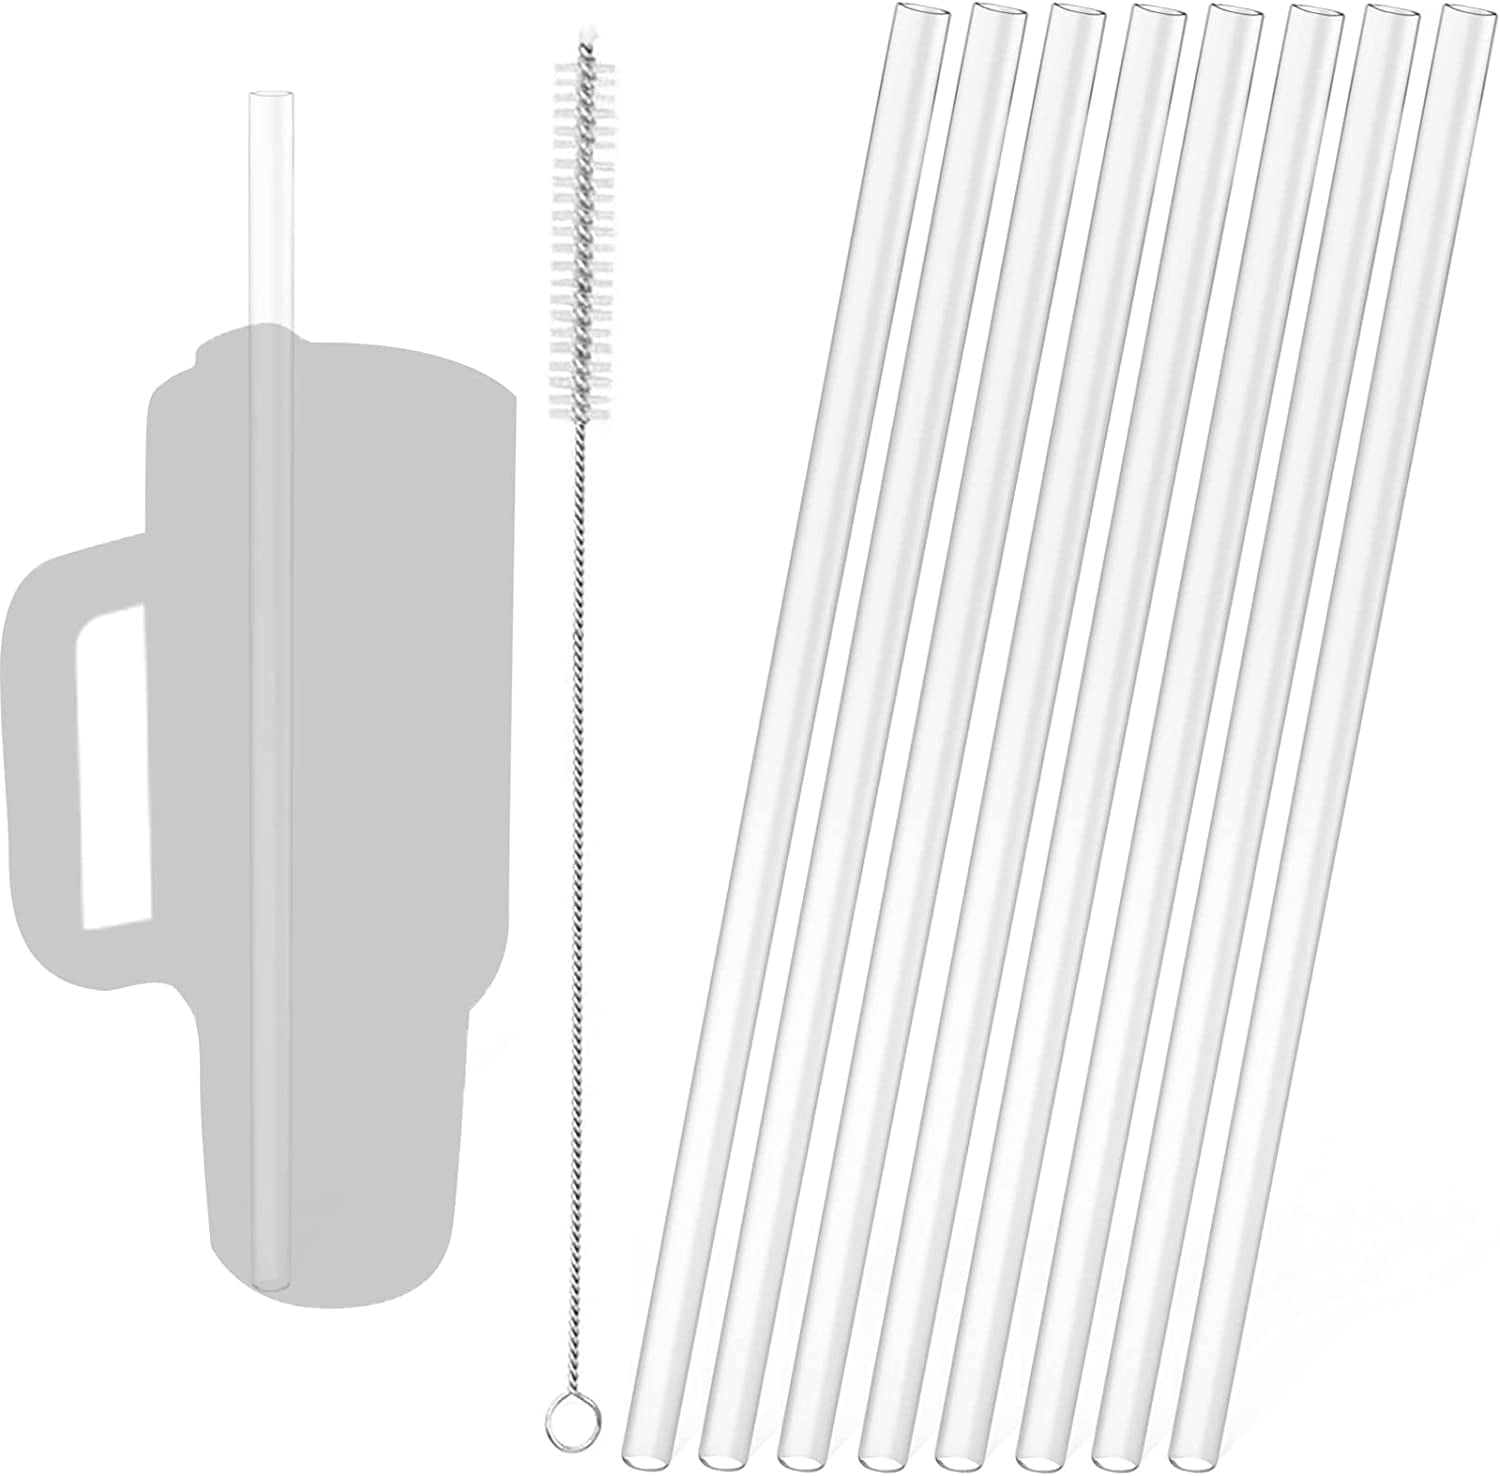 XANGNIER 10 Pack Replacement Straws for Stanley 40 oz&30 oz Tumbler with  Handle,Reusable Clear Plast…See more XANGNIER 10 Pack Replacement Straws  for